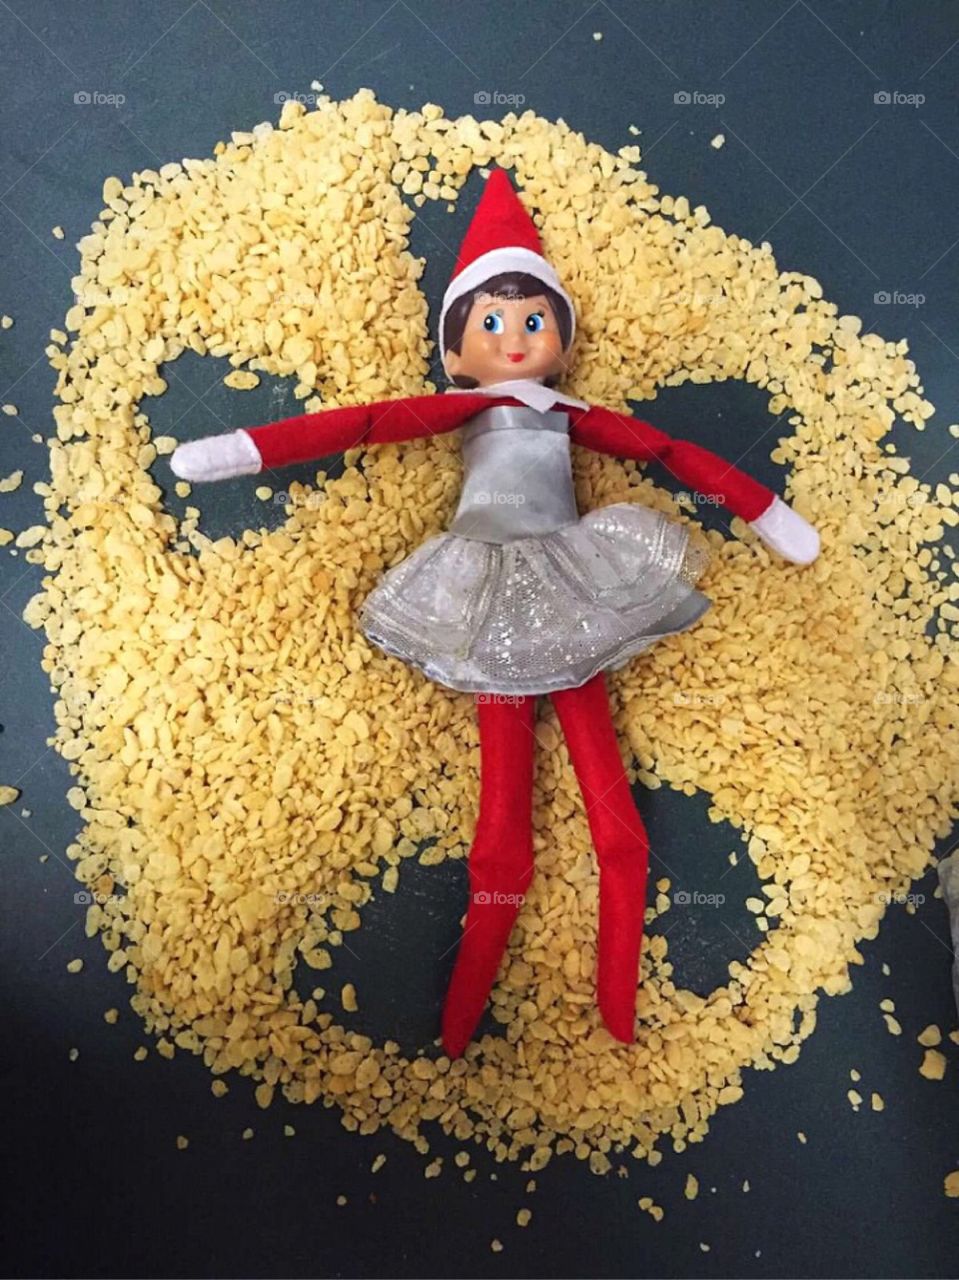 Our elf making a Rice Krispies Angel. 